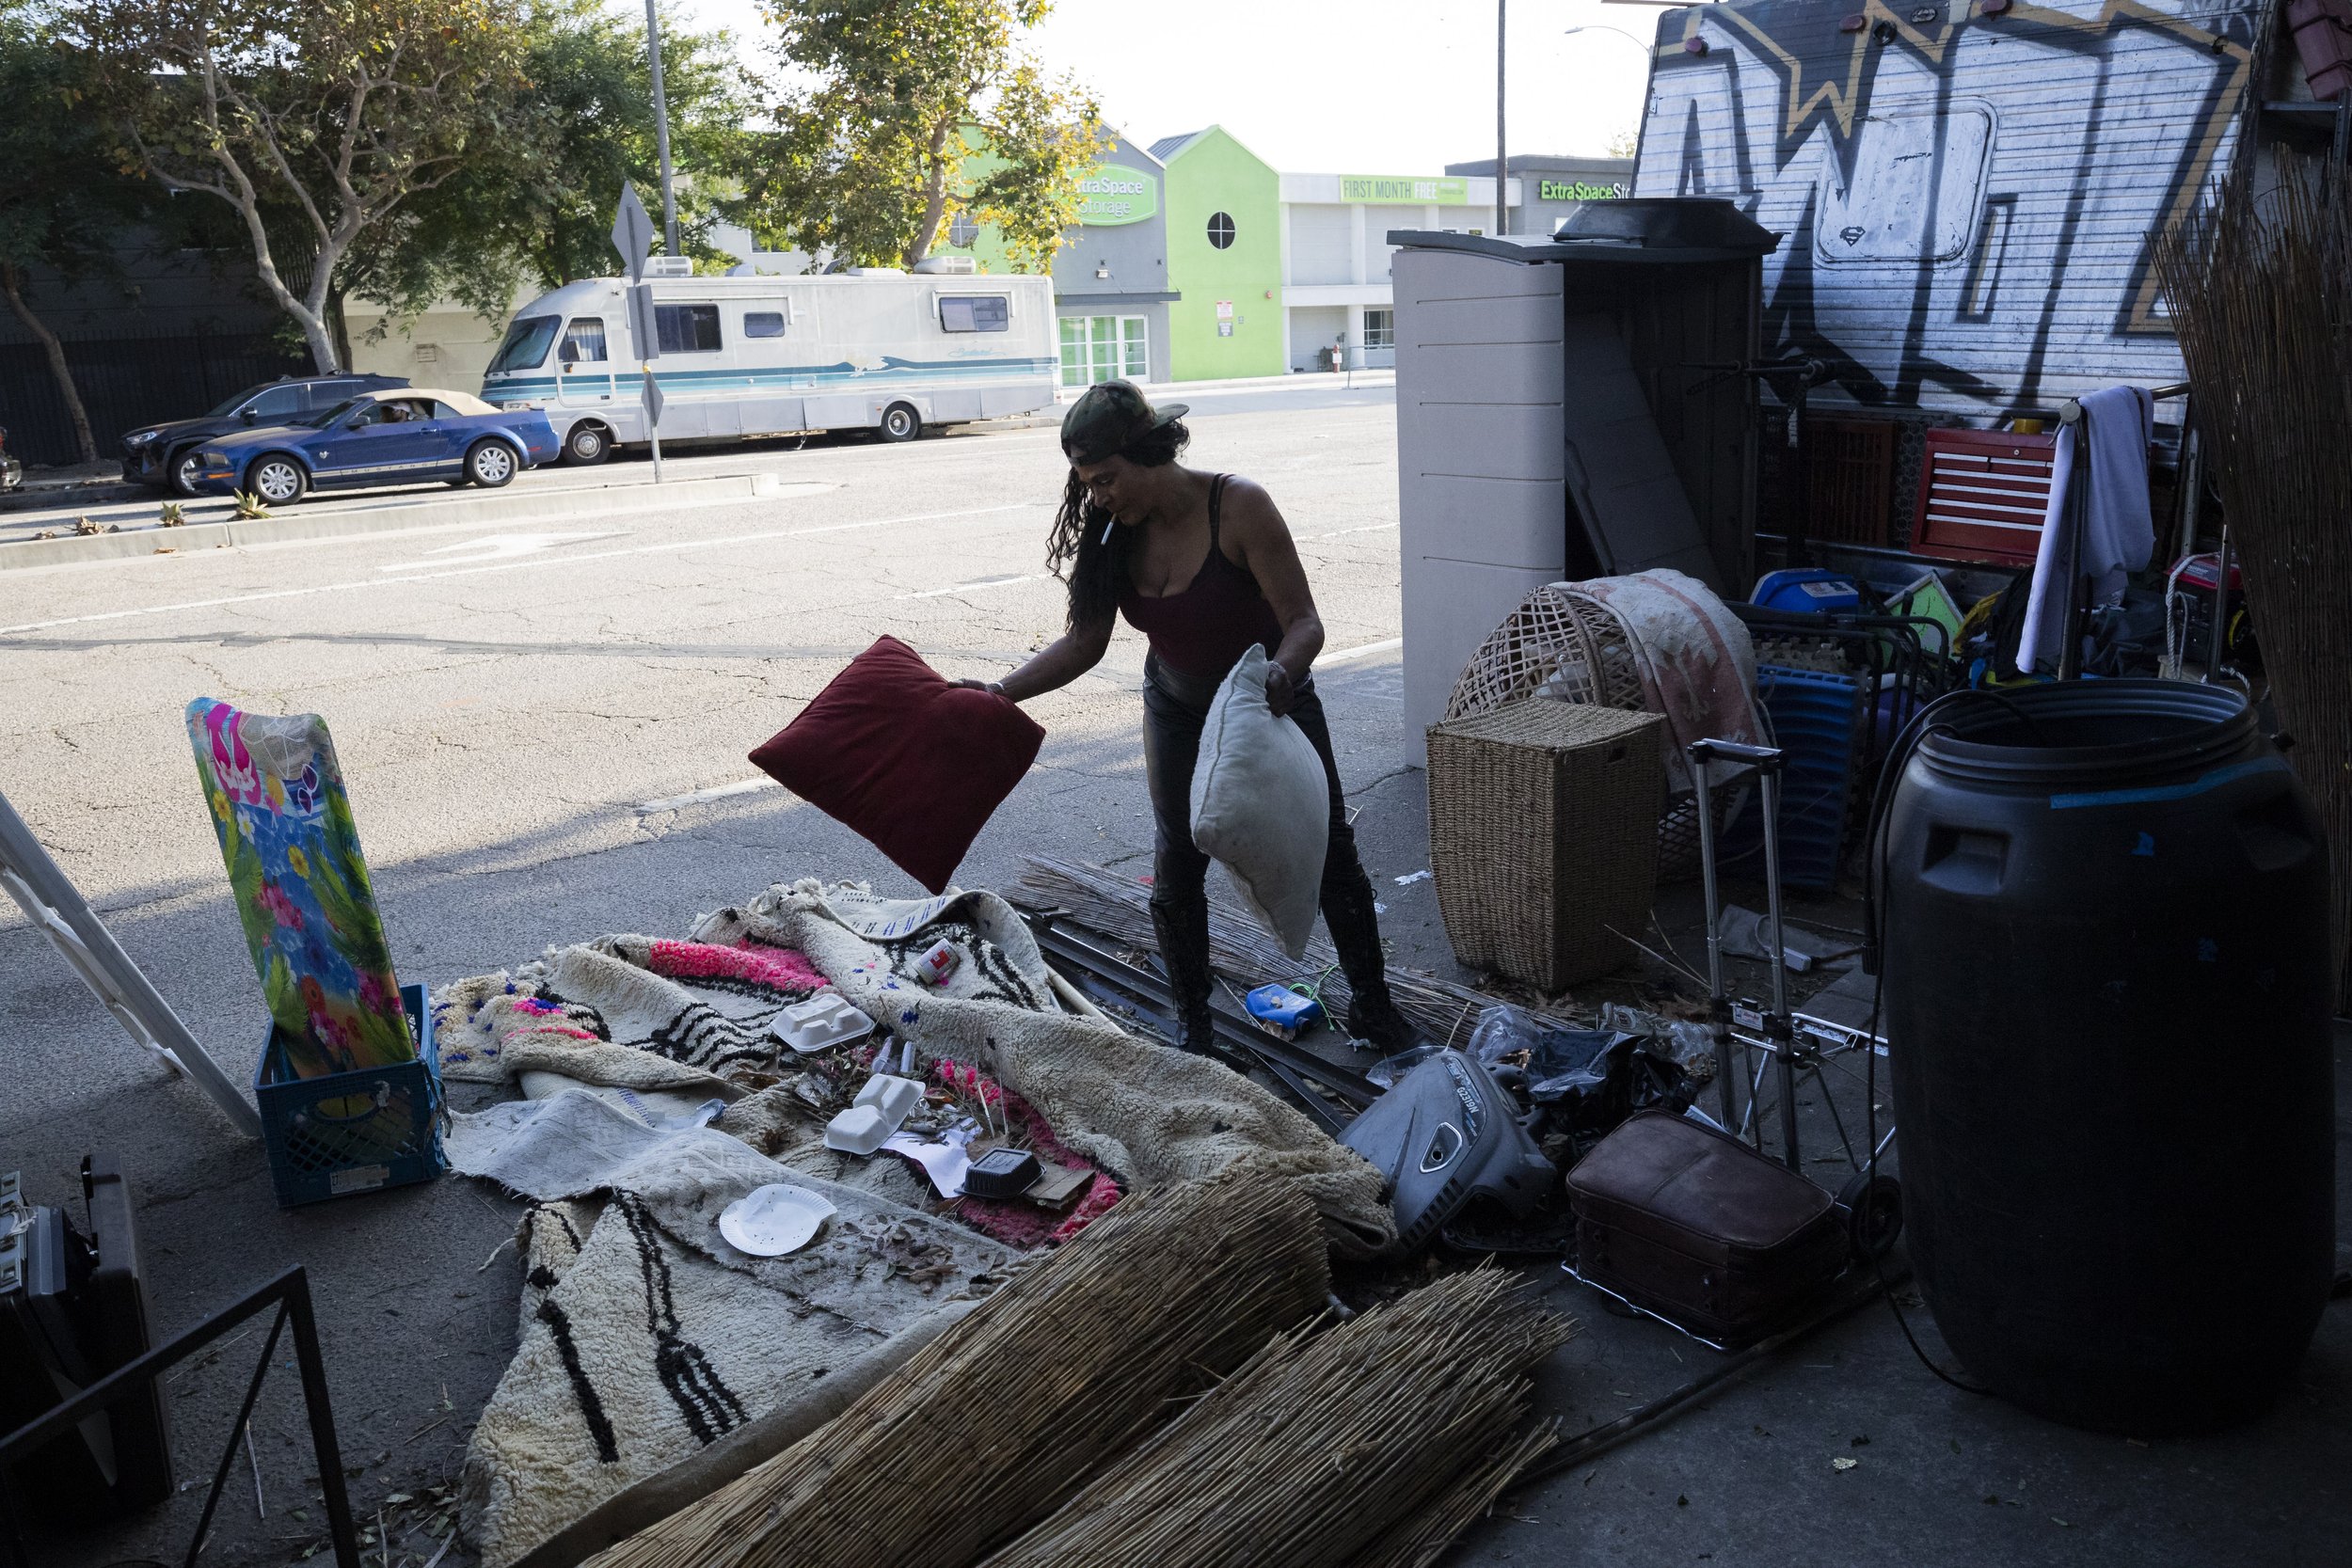  Rebecca Dannenbaum cleaning the street around the RV she lives in on Venice Blvd. in Los Angeles, Calif., on Oct. 24, 2023. She wants to avoid having her vehicle towed, so she is cleaning the street so sanitation doesn’t have to with the hopes that 